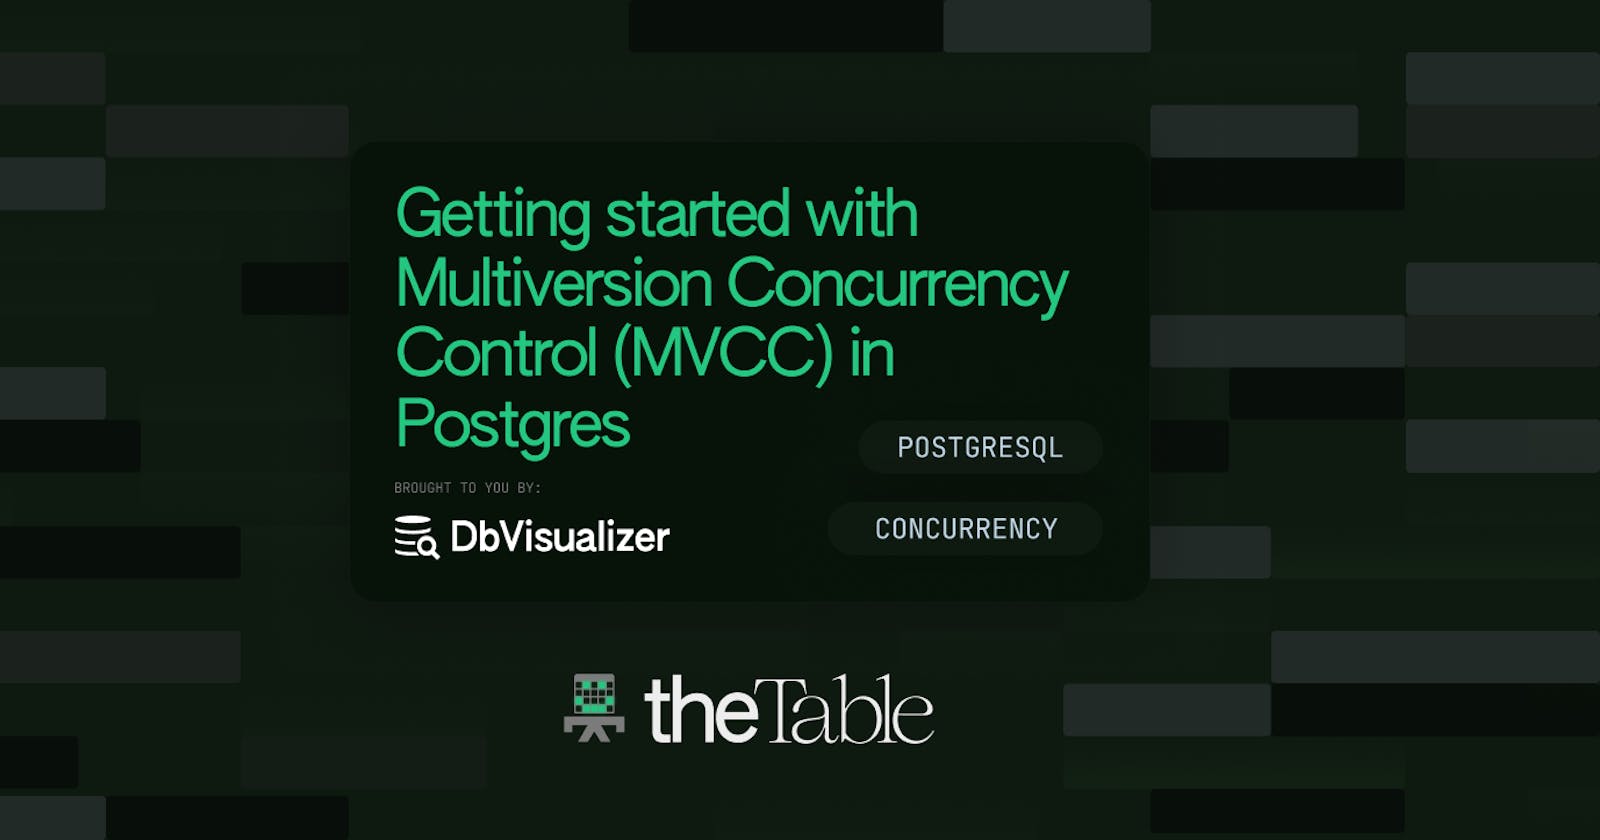 Getting Started with Multiversion Concurrency Control (MVCC) in PostgreSQL